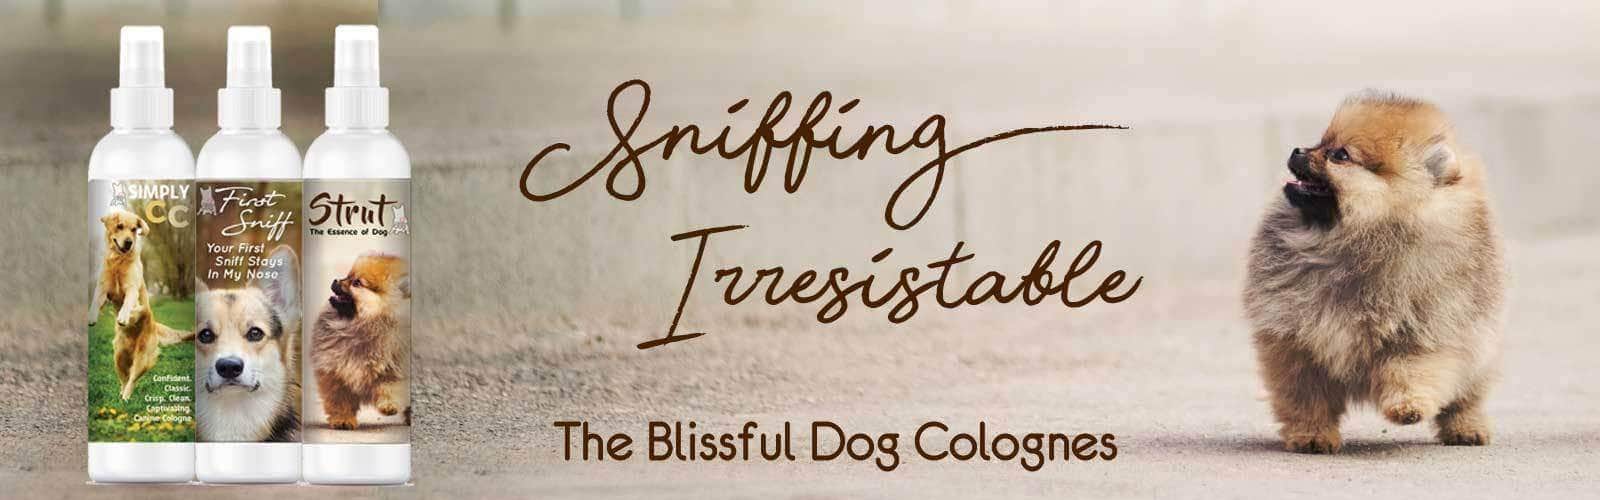 Sniffing Irresistible New Dog Colognes